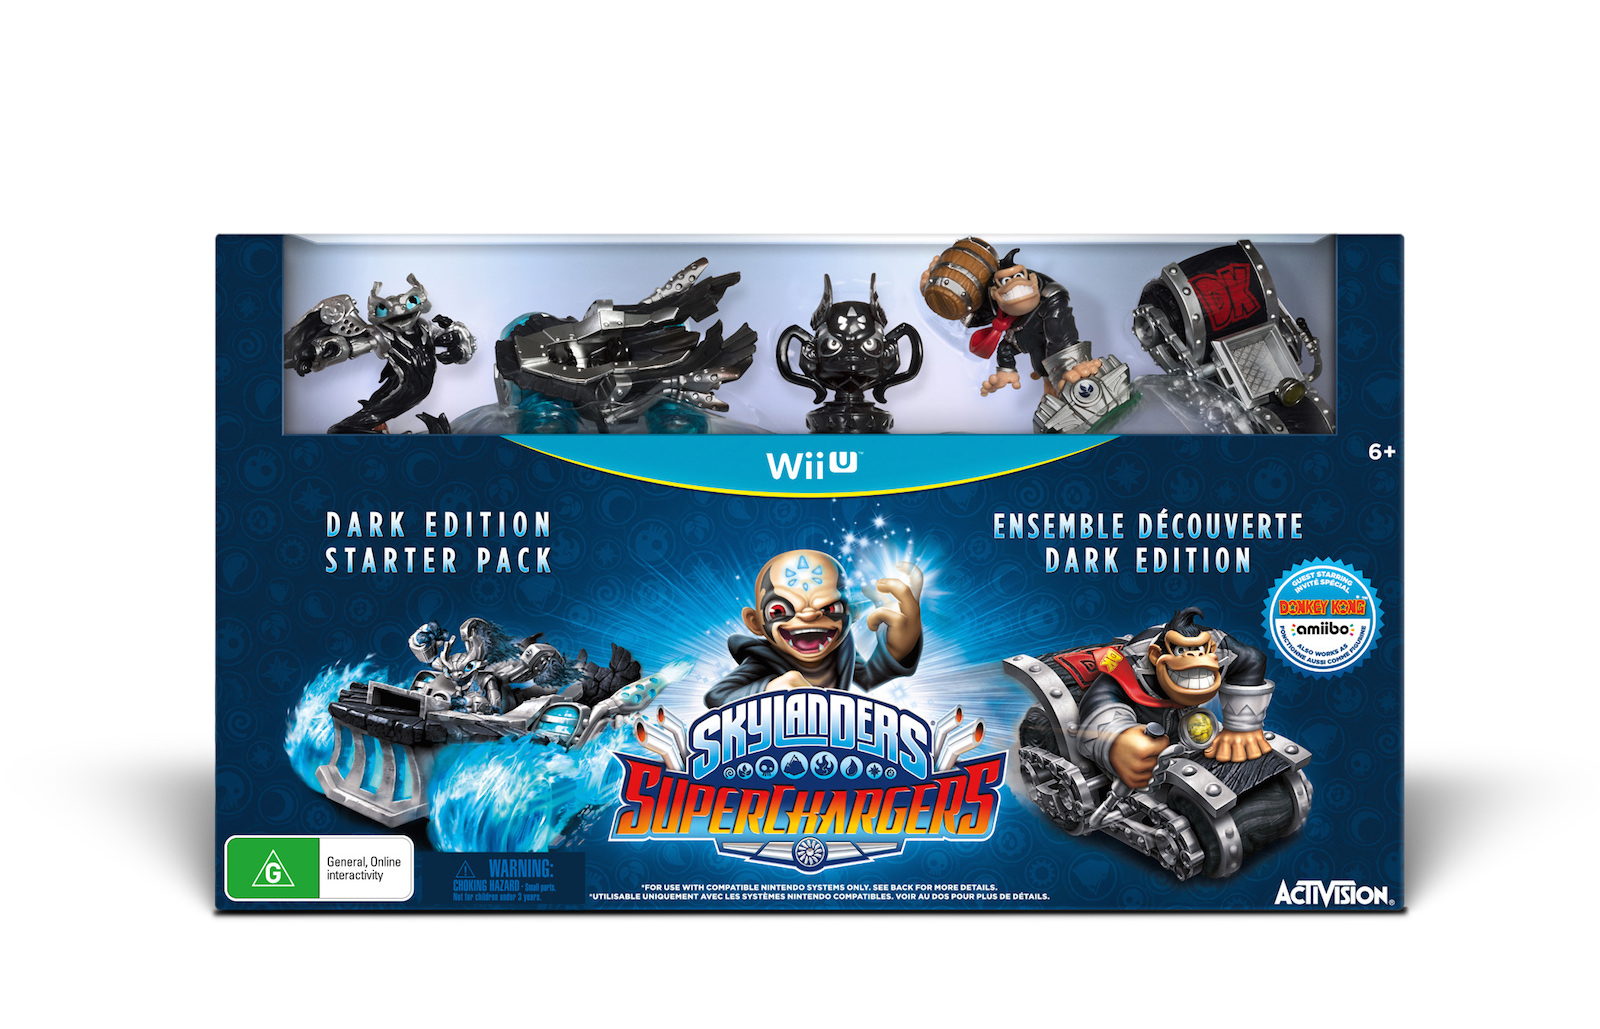 Activision have announced a special Dark Edition of Skylanders Supercharged...